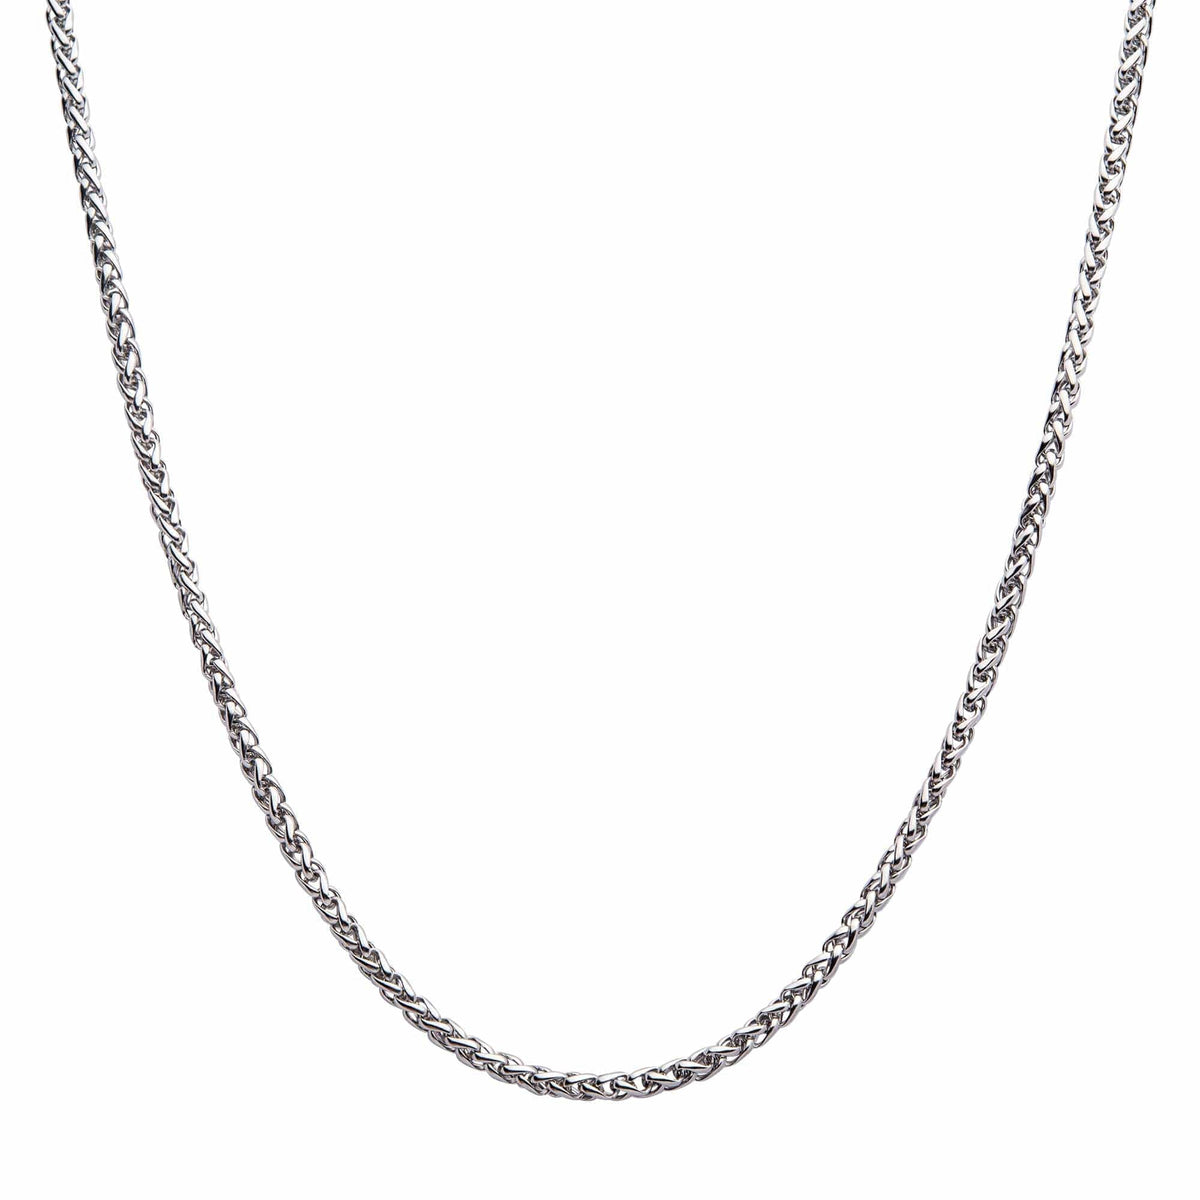 INOX JEWELRY Chains Silver Tone Stainless Steel 4mm Wheat Chain